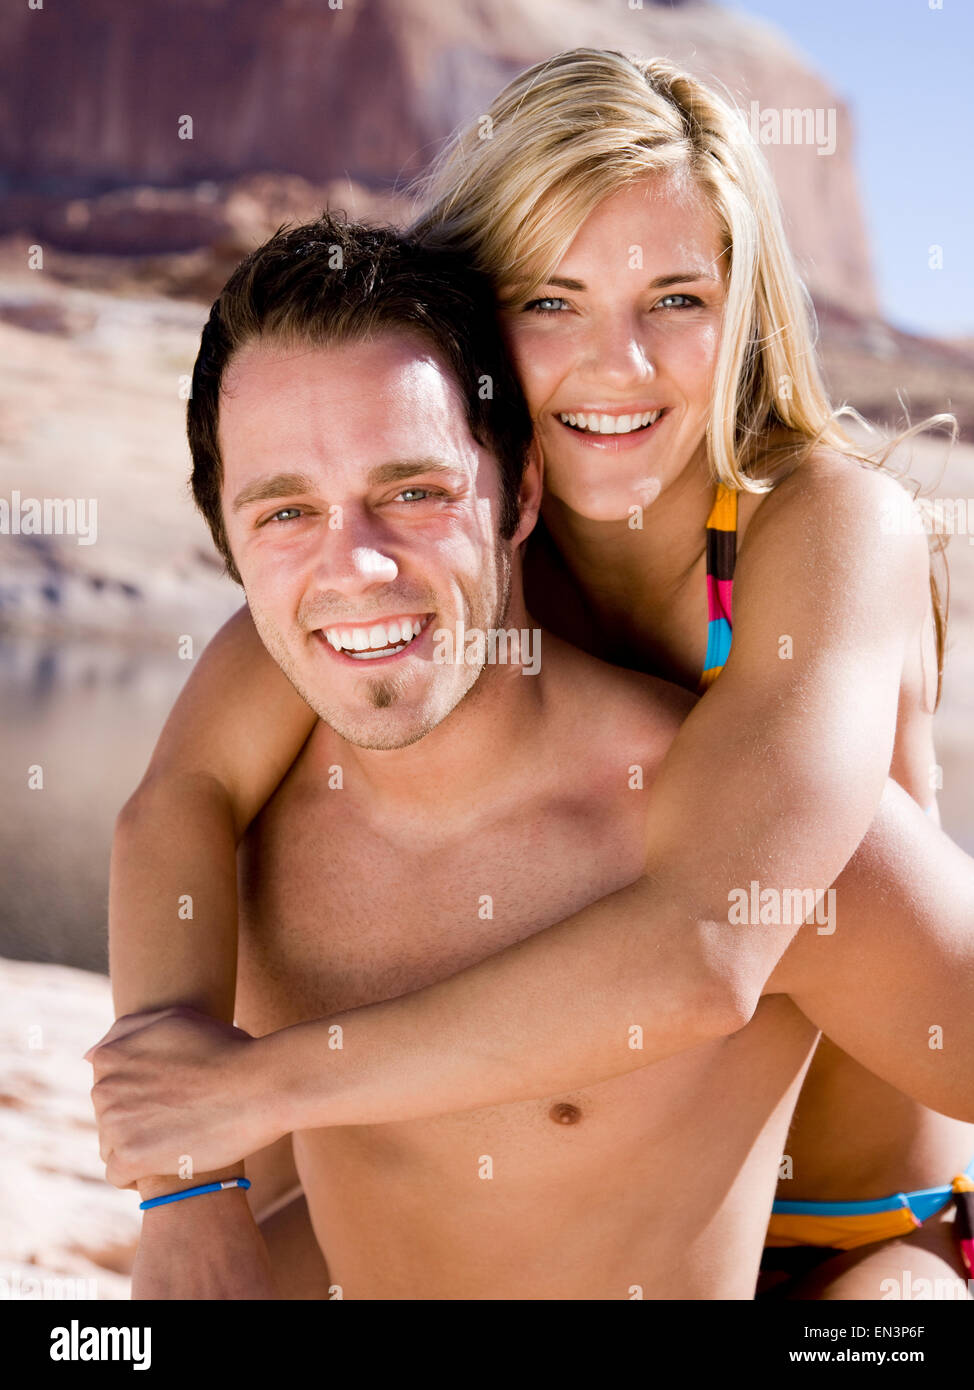 young couple at lake powell Stock Photo